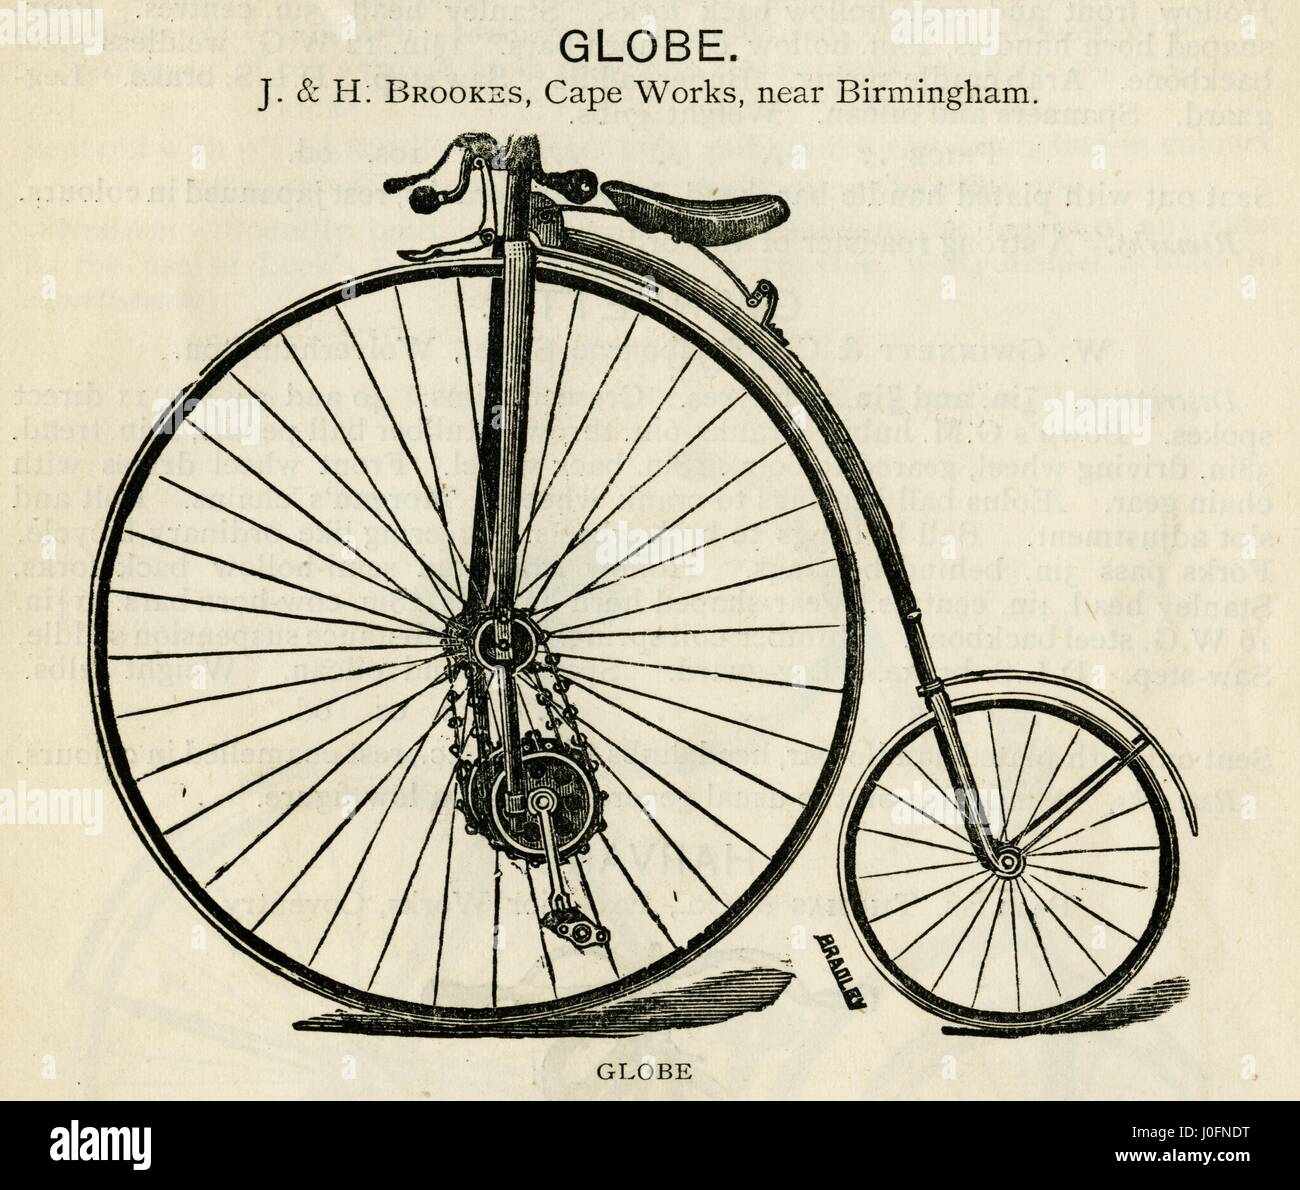 The Globe bicycle by J and H Brookes near Birmingham Stock Photo